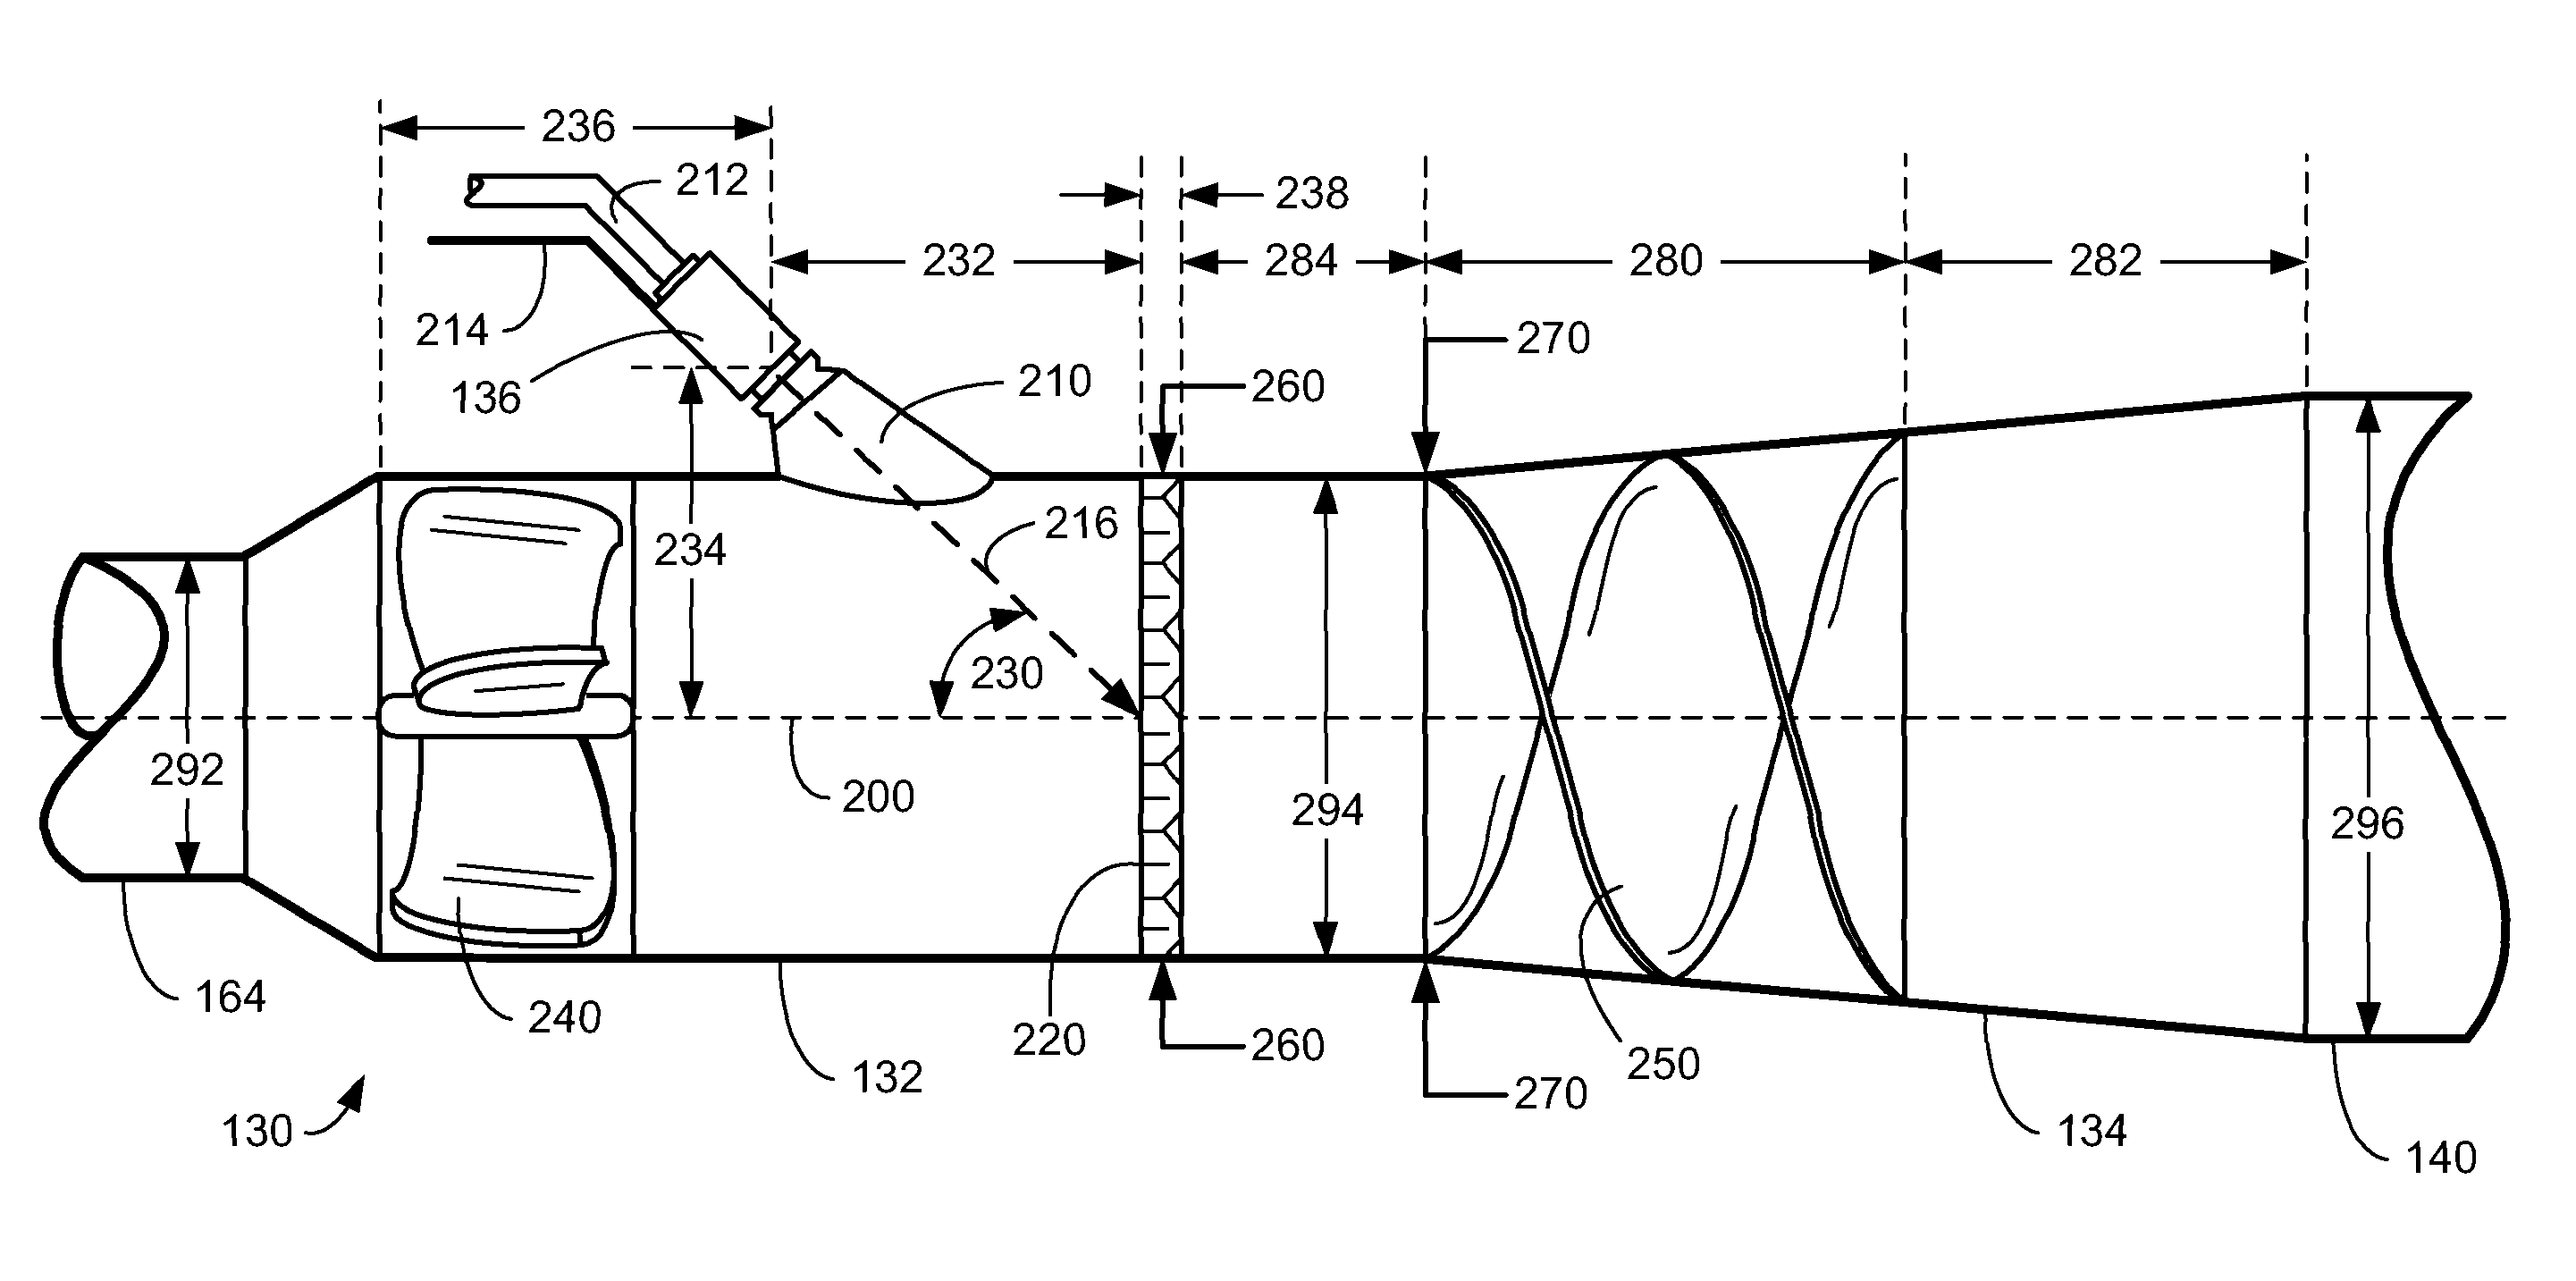 Approach for delivering a liquid reductant into an exhaust flow of a fuel burning engine